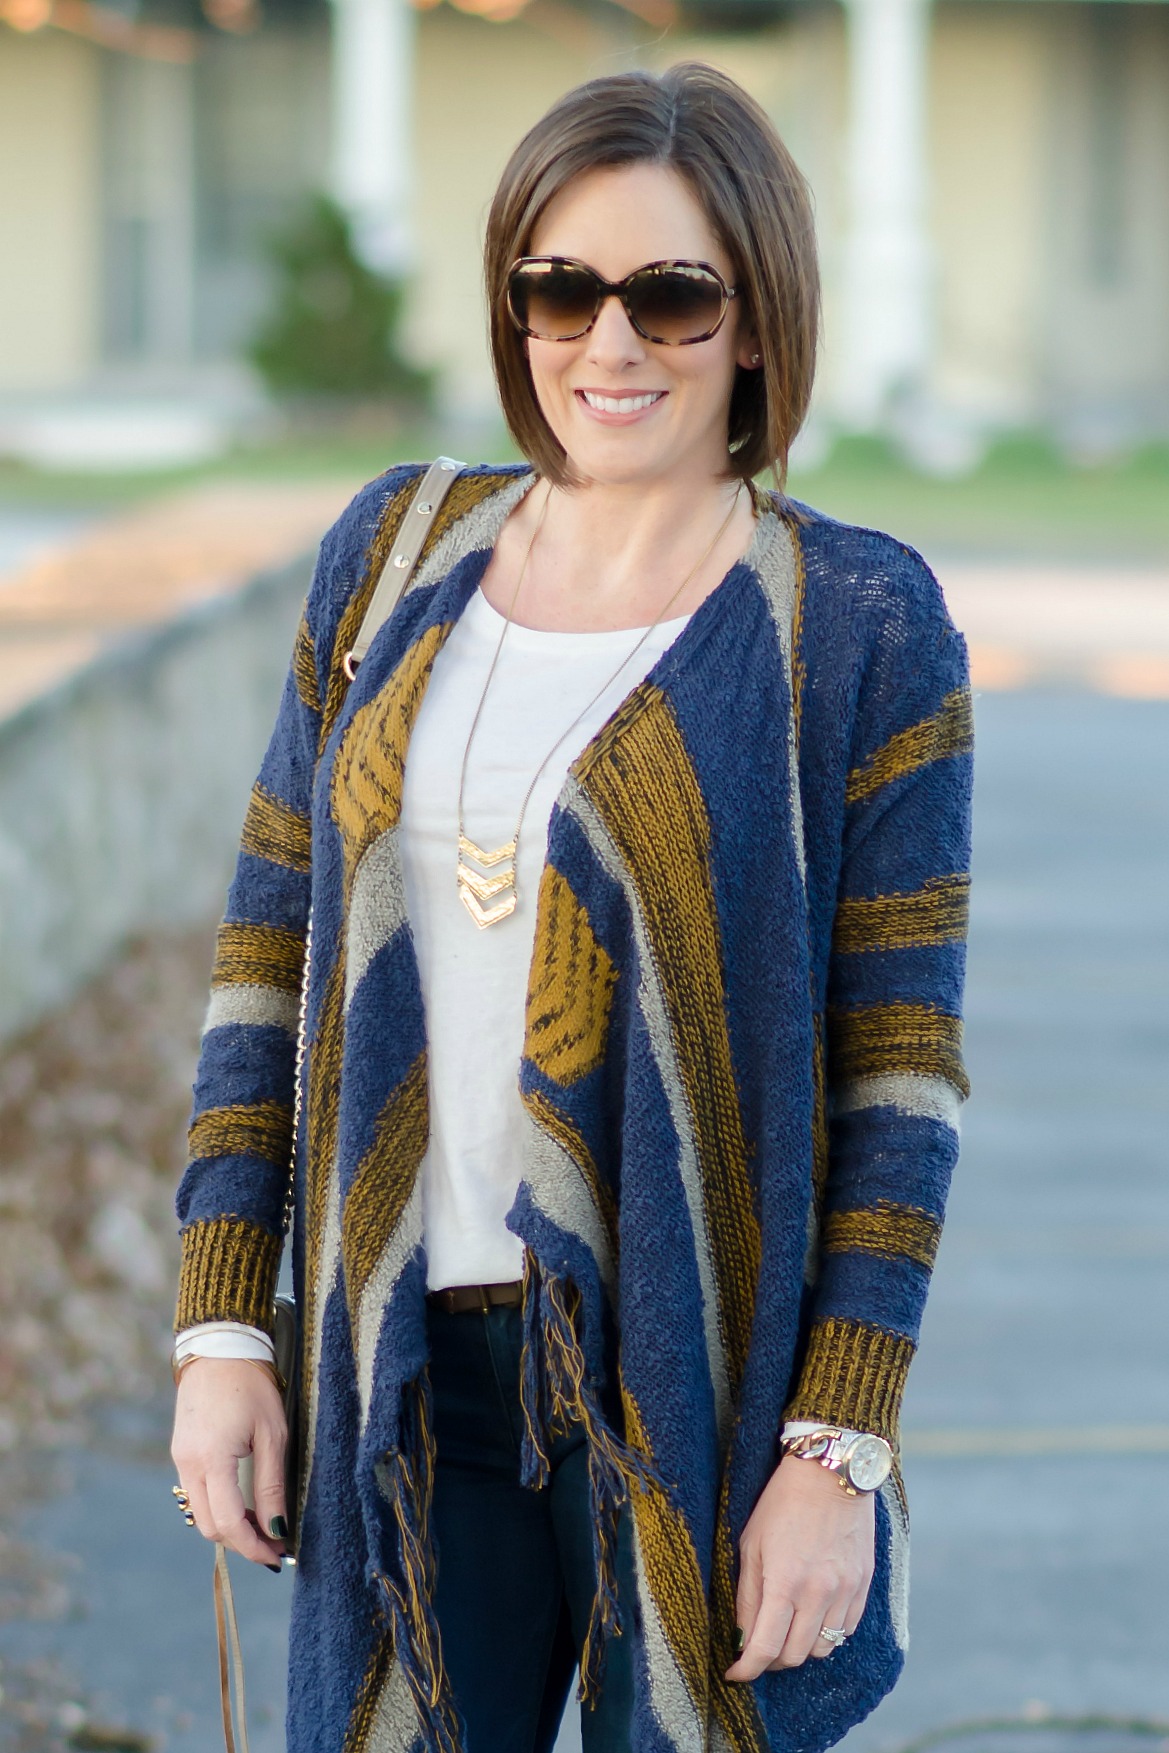 Winter Outfit Ideas: How to Wear a Drape Front Cardigan